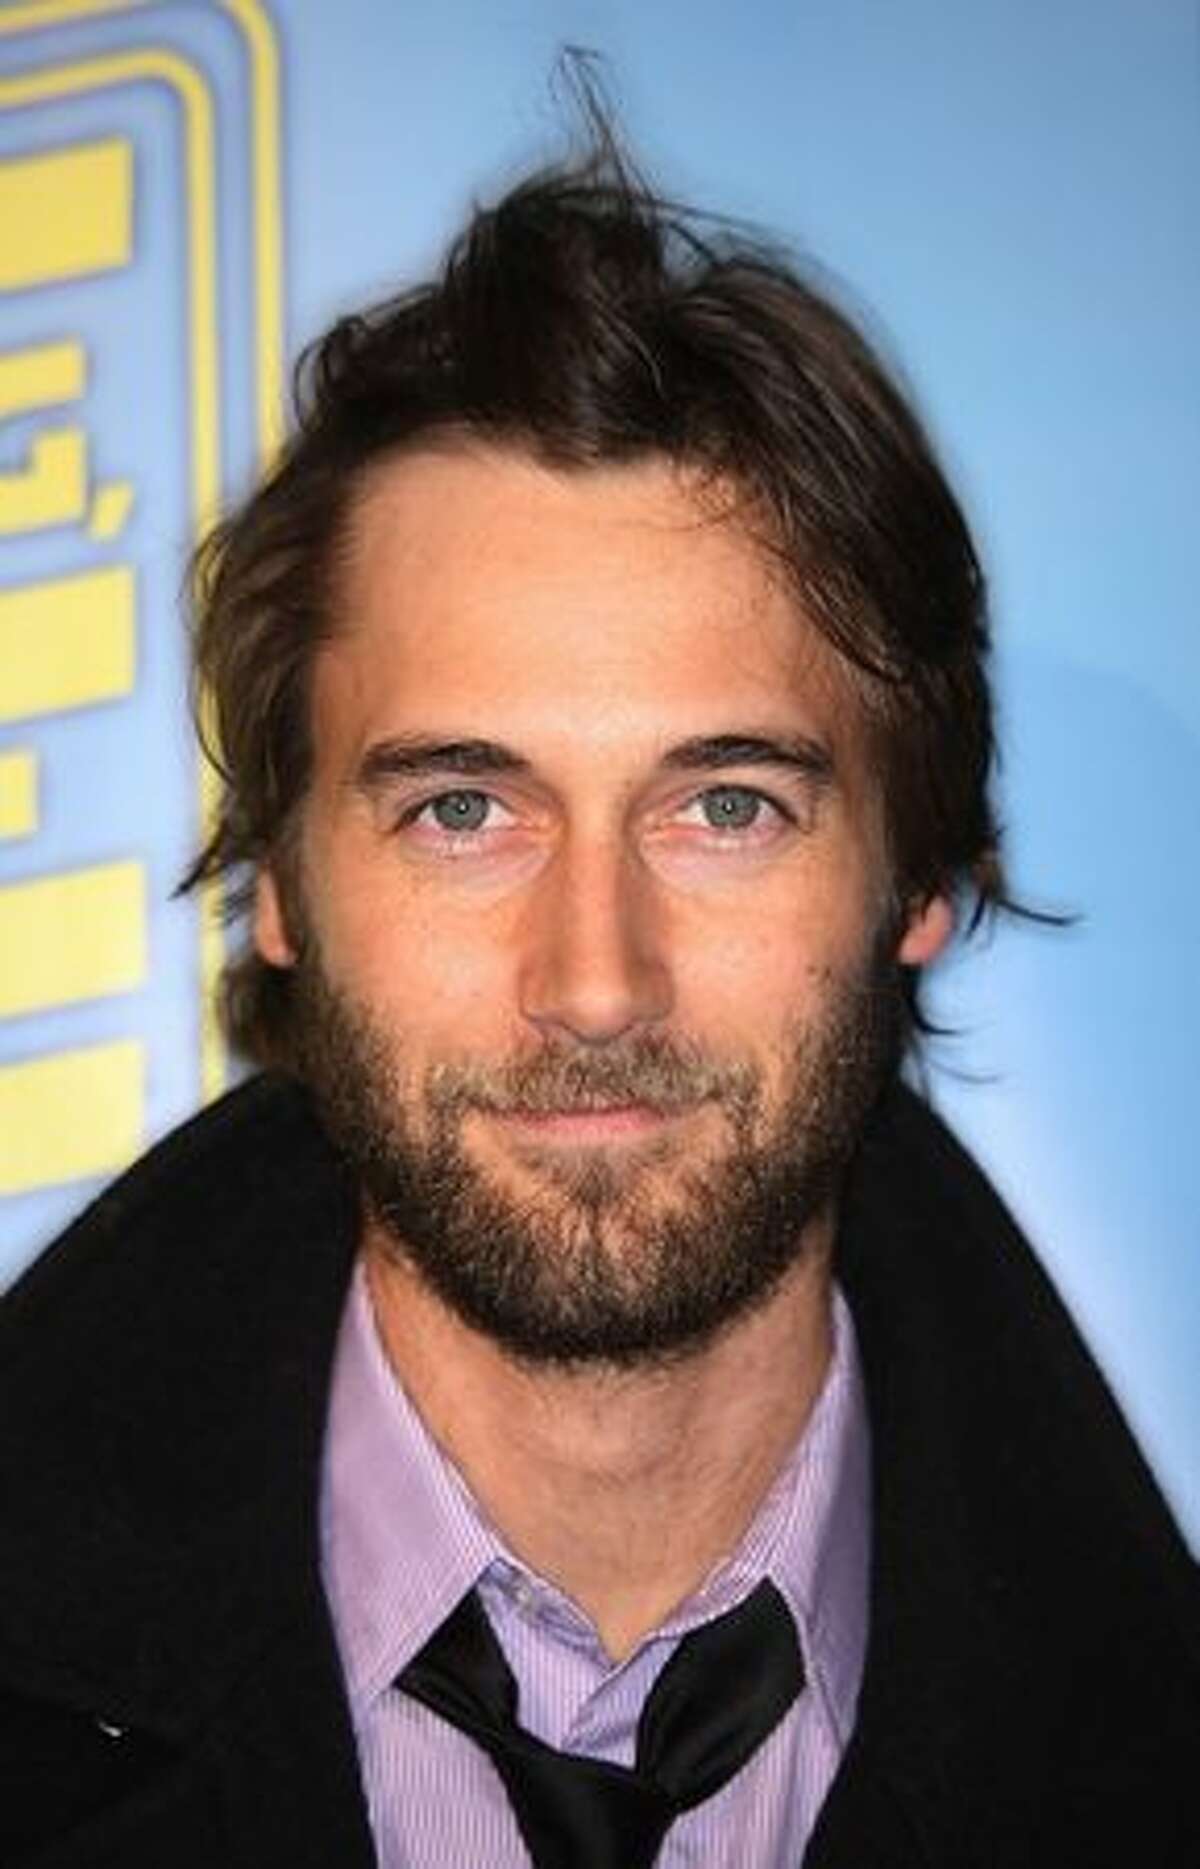 Actor Ryan Eggold attends Family Guy's "Something, Something, Something, Dark Side" DVD release party at a private residence on Saturday in Beverly Hills, California.